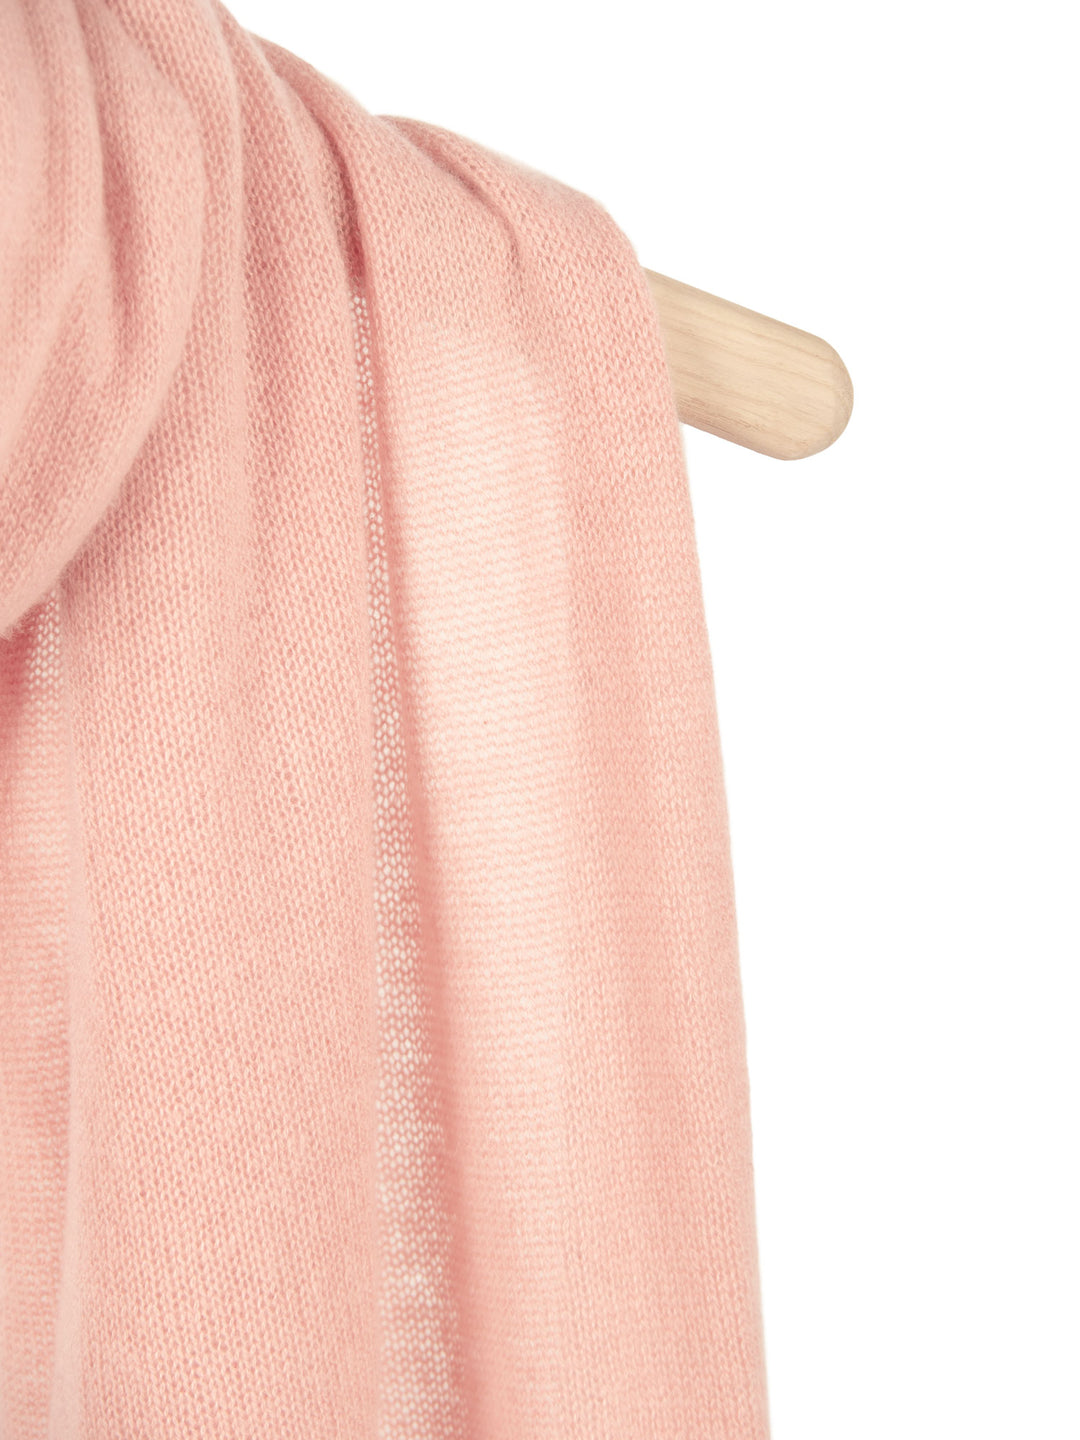 Cashmere scarf "Flow" 100% cashmere from  Kashmina, peachy pink